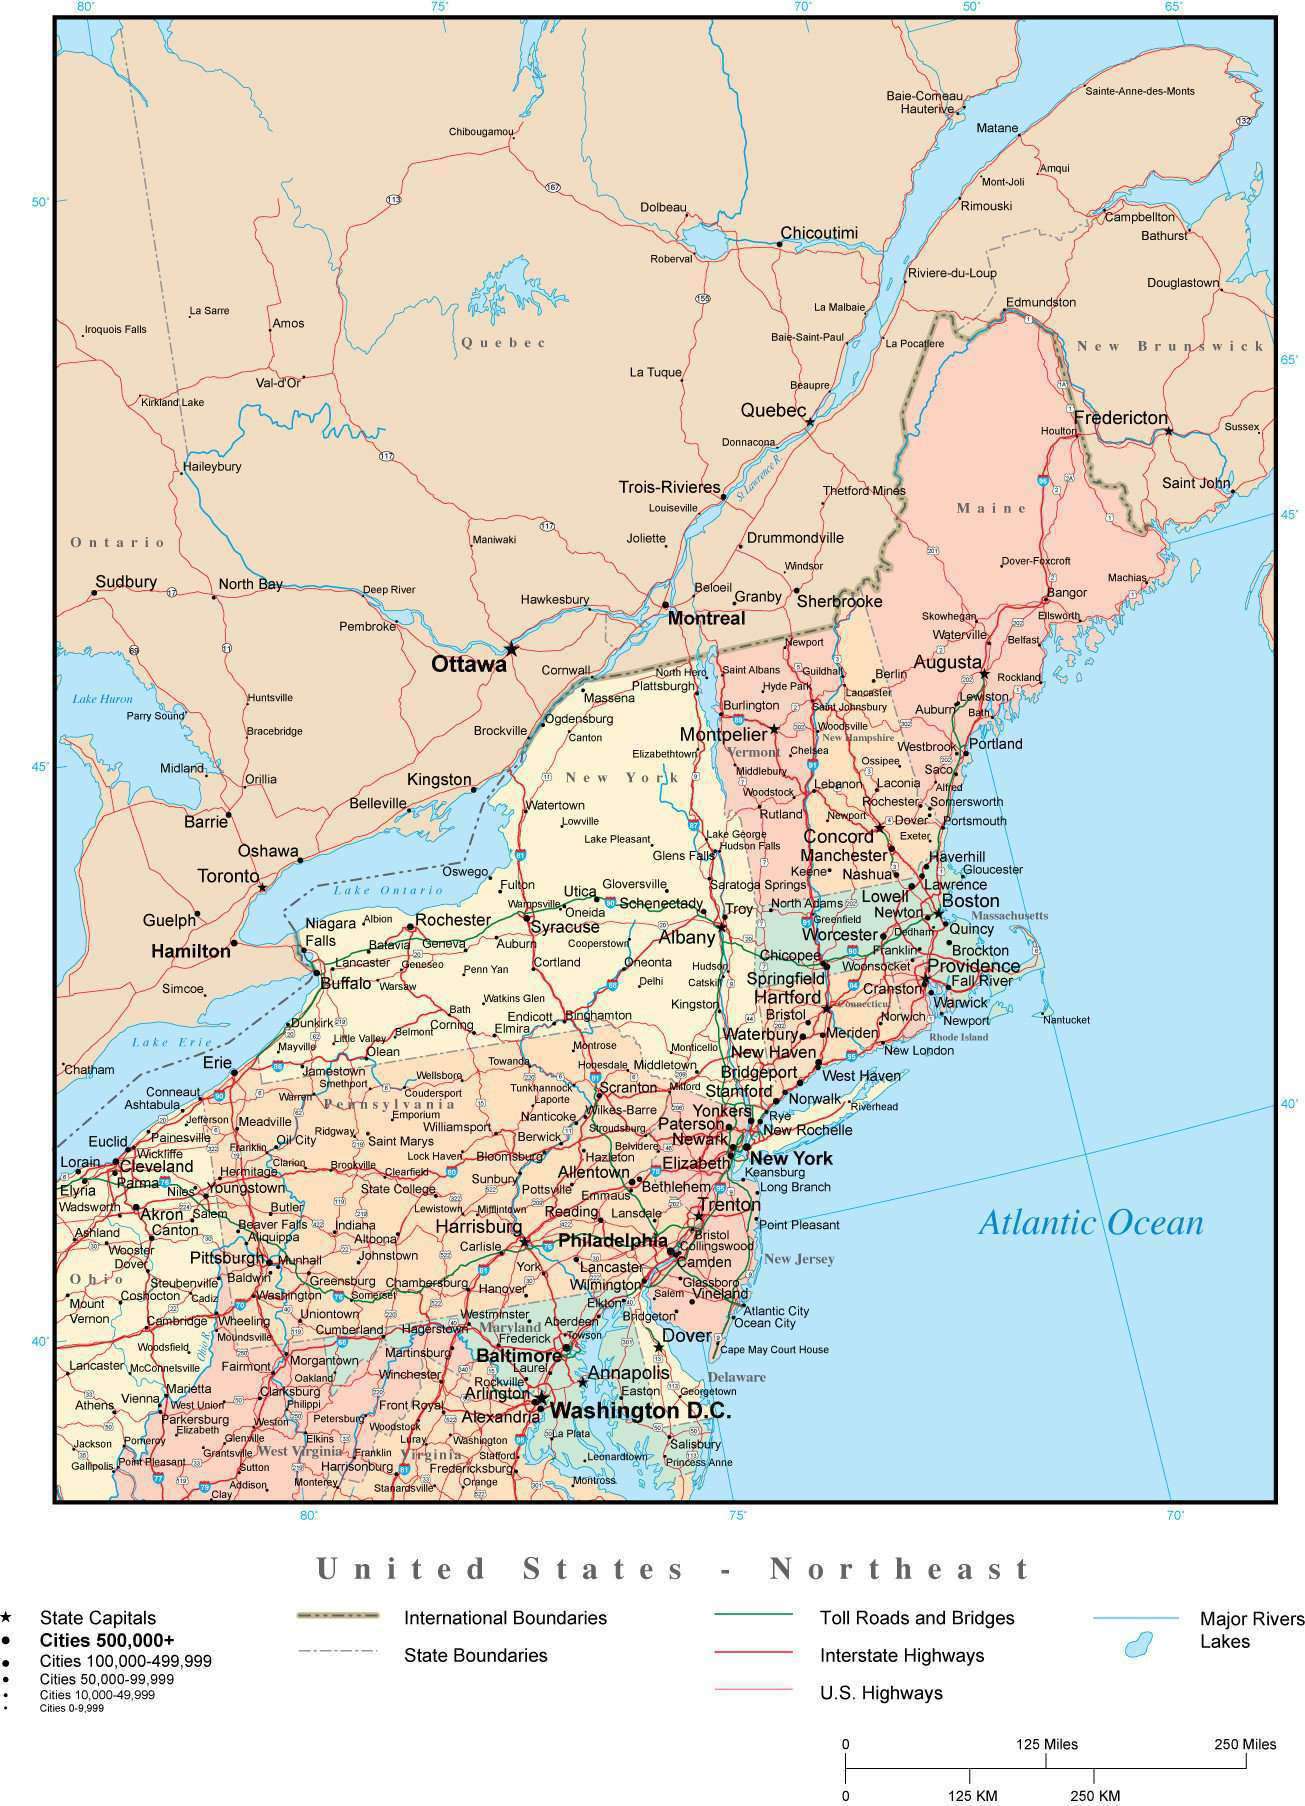 usa-northeast-region-map-with-state-boundaries-highways-and-cities